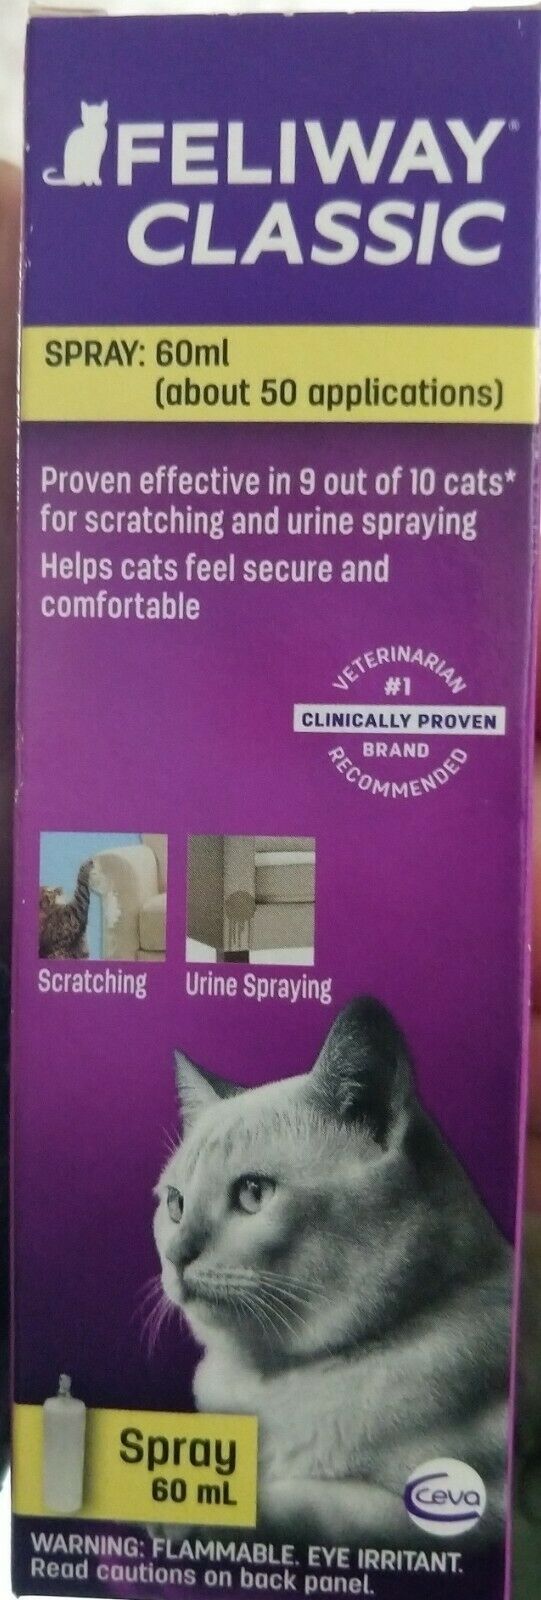 Feliway Classic Spray : 60 ml for Scratching and Urine Spraying